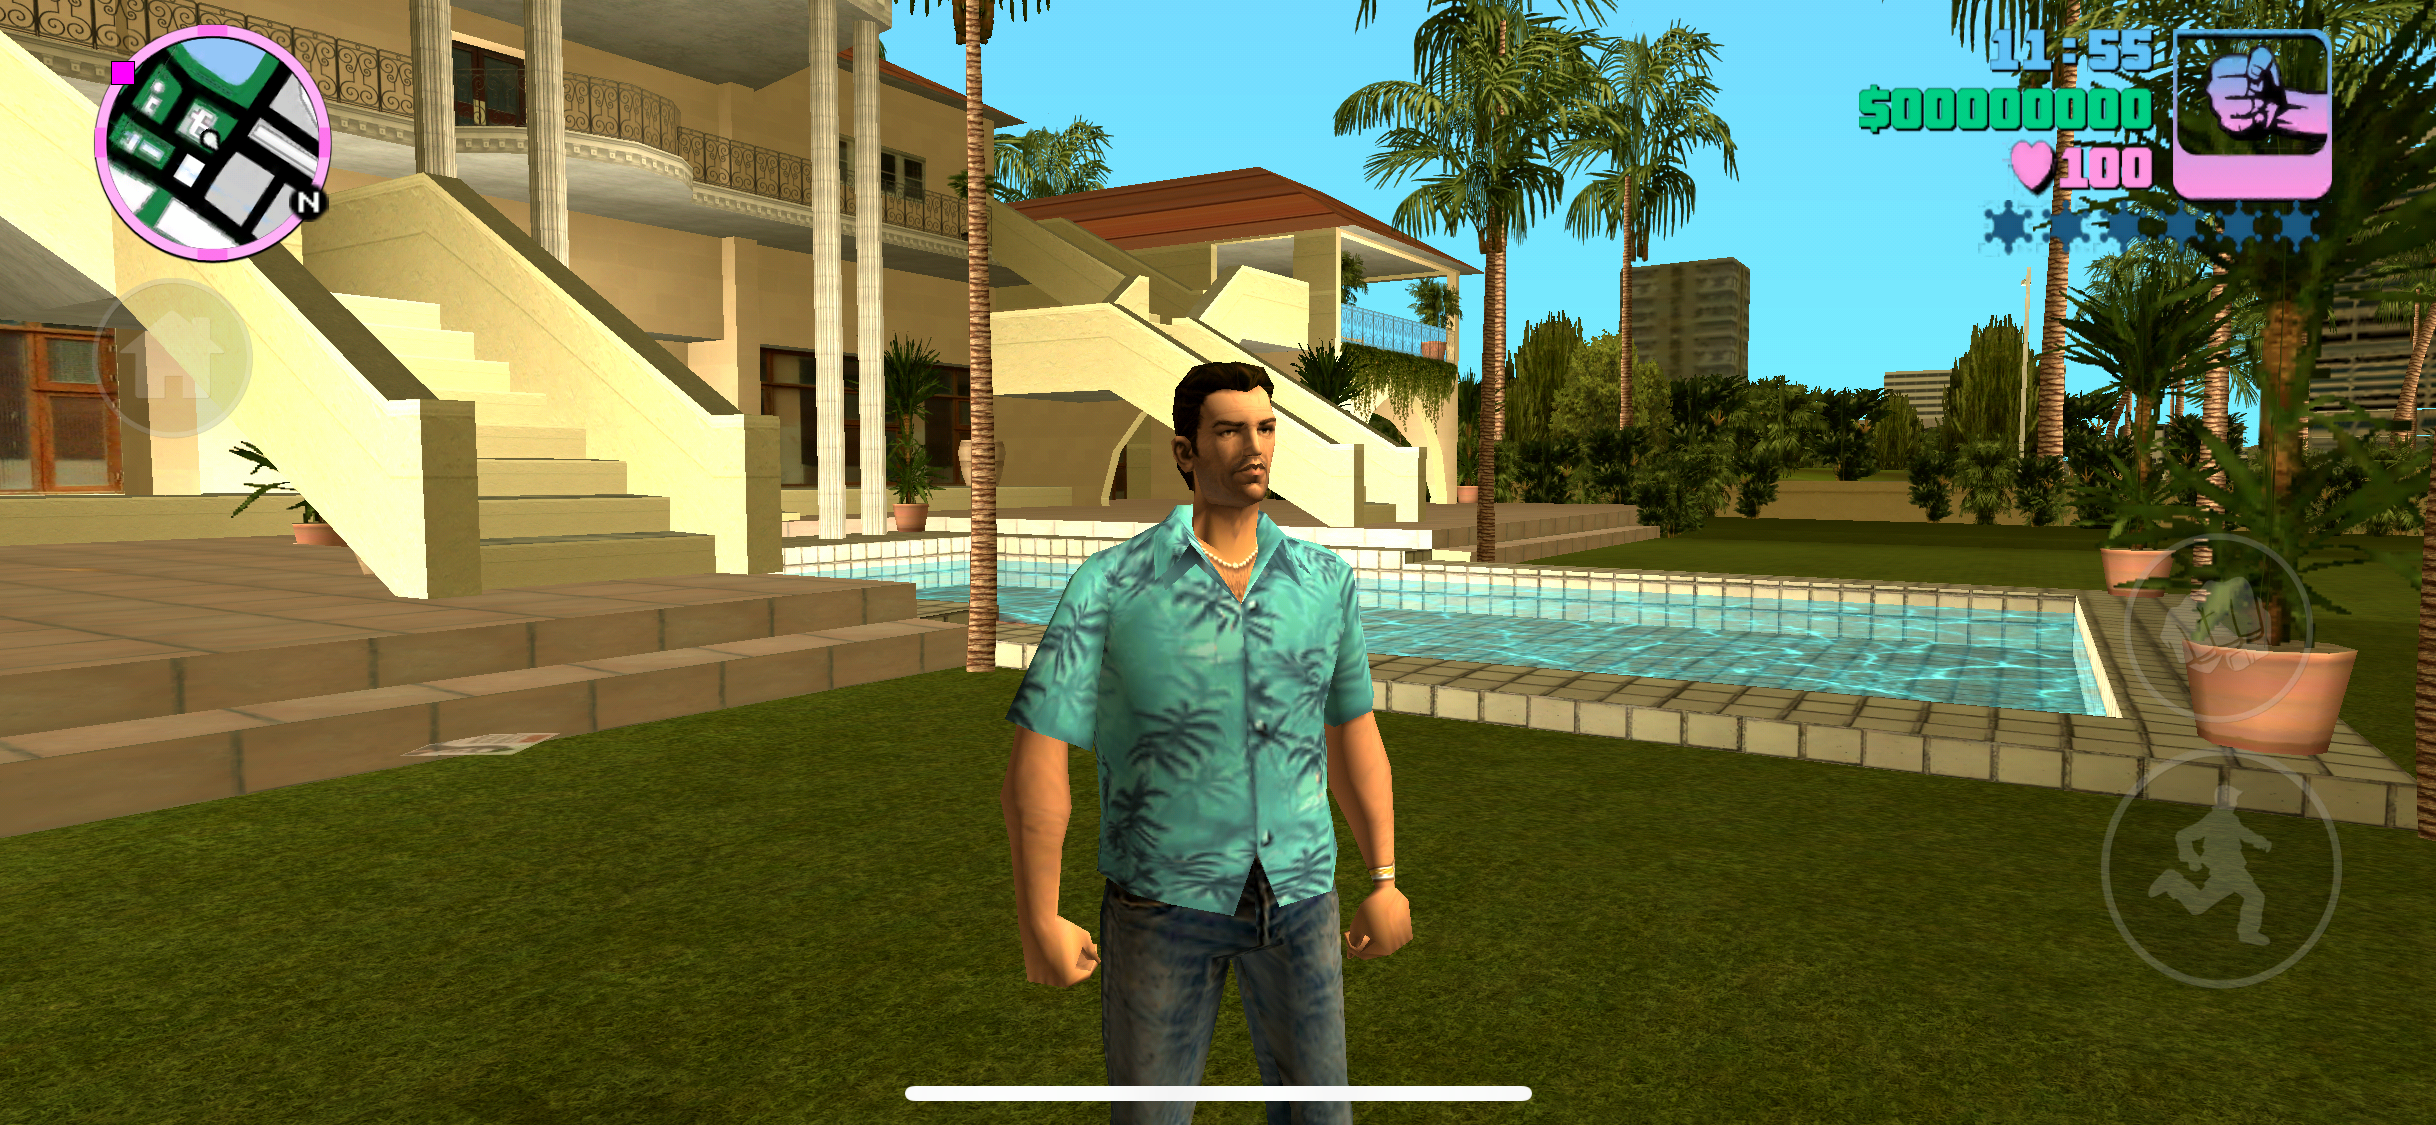 photo of Rockstar Updates ‘Grand Theft Auto: Vice City’ with Full Screen Support for iPhone X and iPad Pro Models image